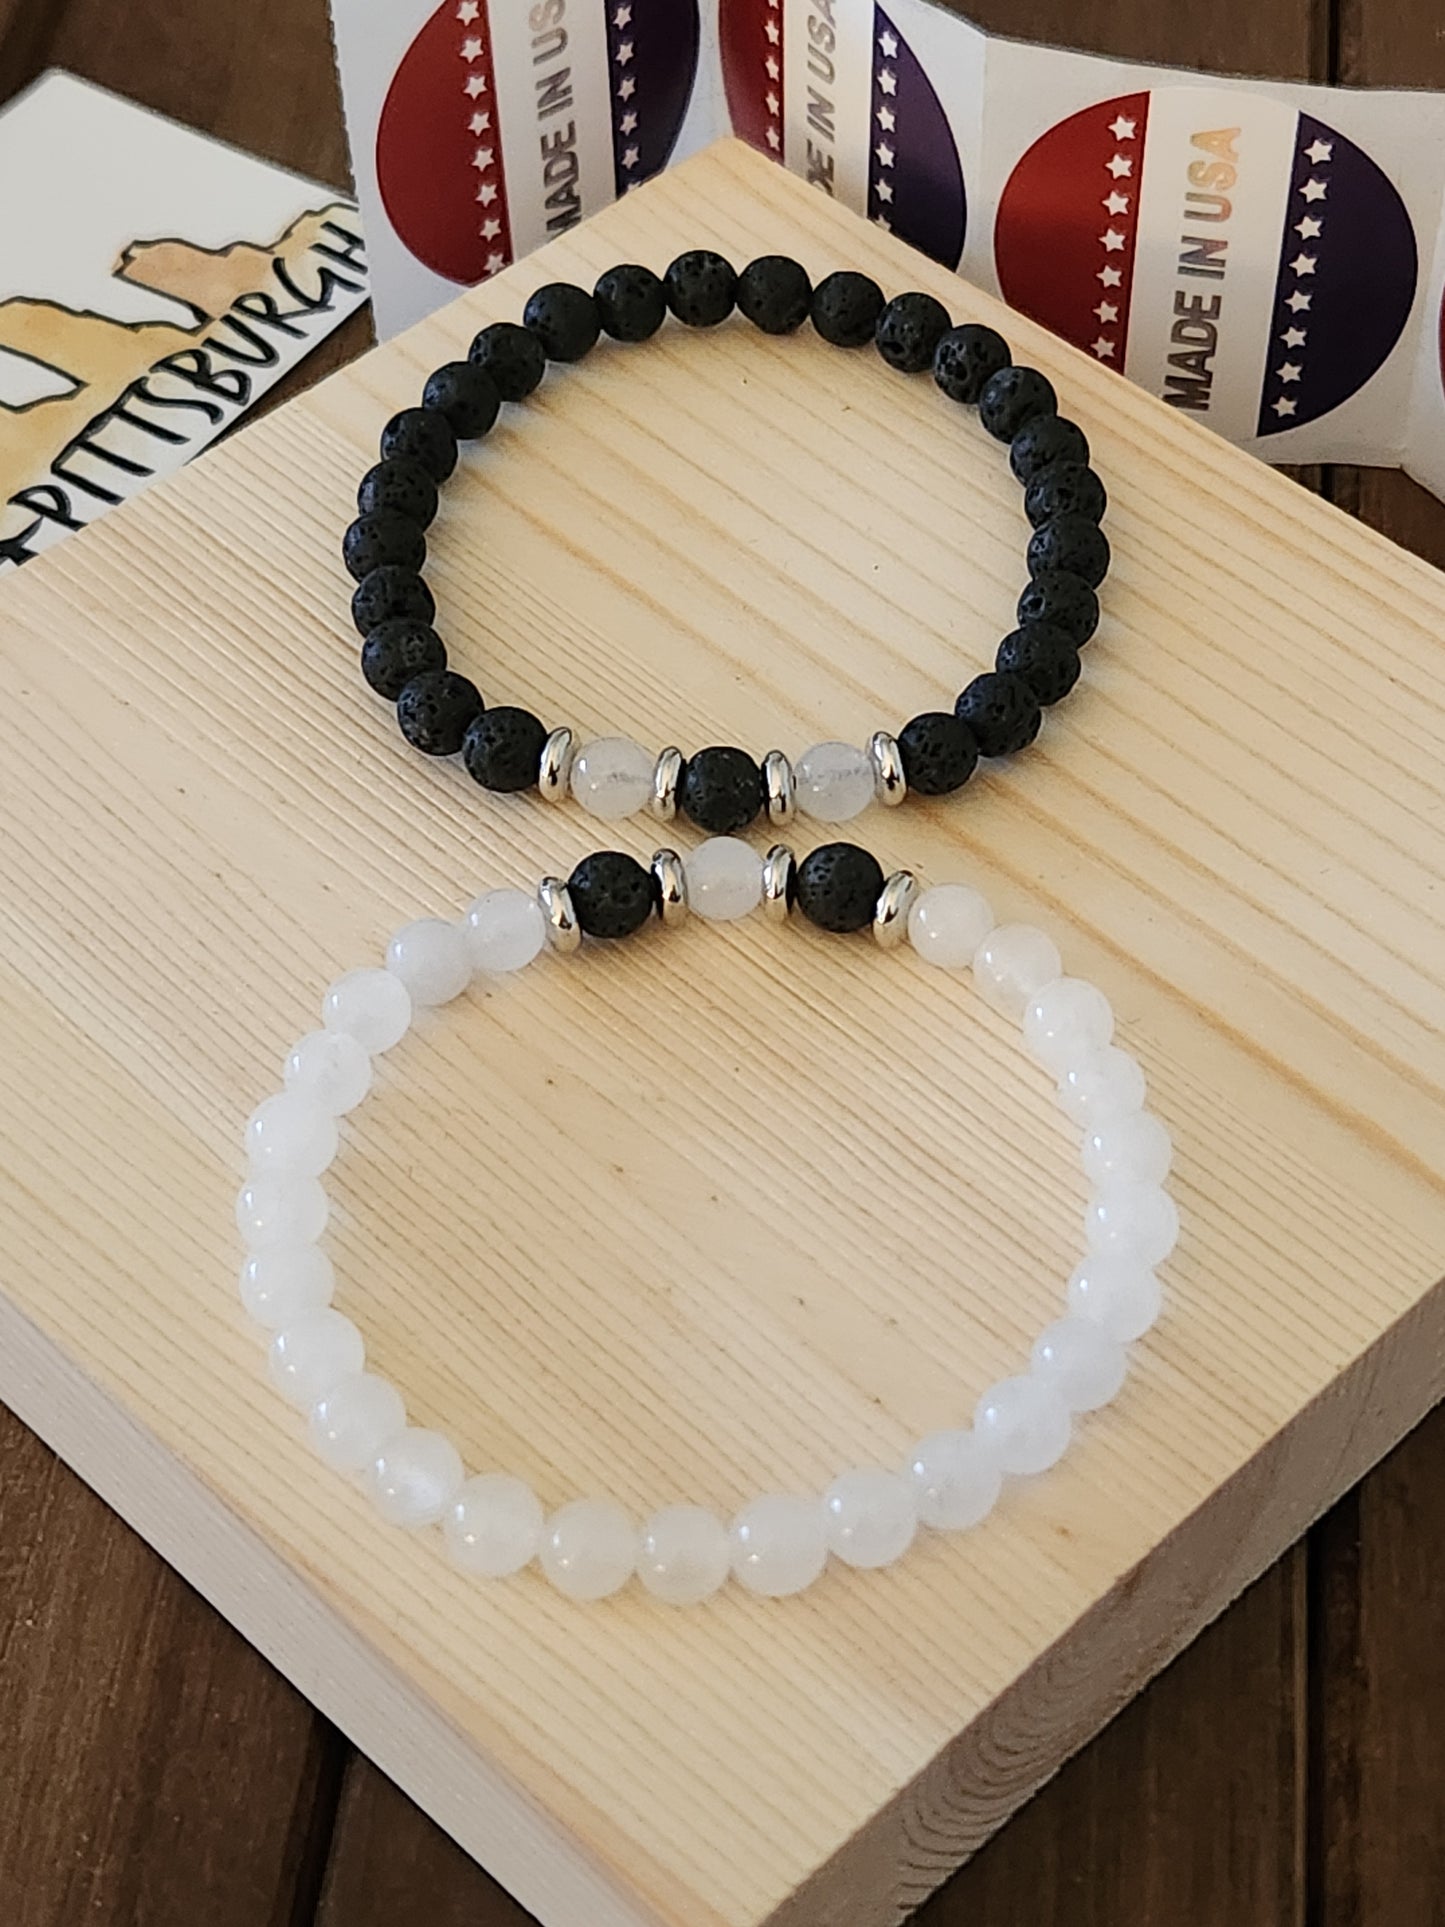 Black Volcanic Lava Stone and White Jade Stone Bracelet Set - courage - stability - calming - direction - peace